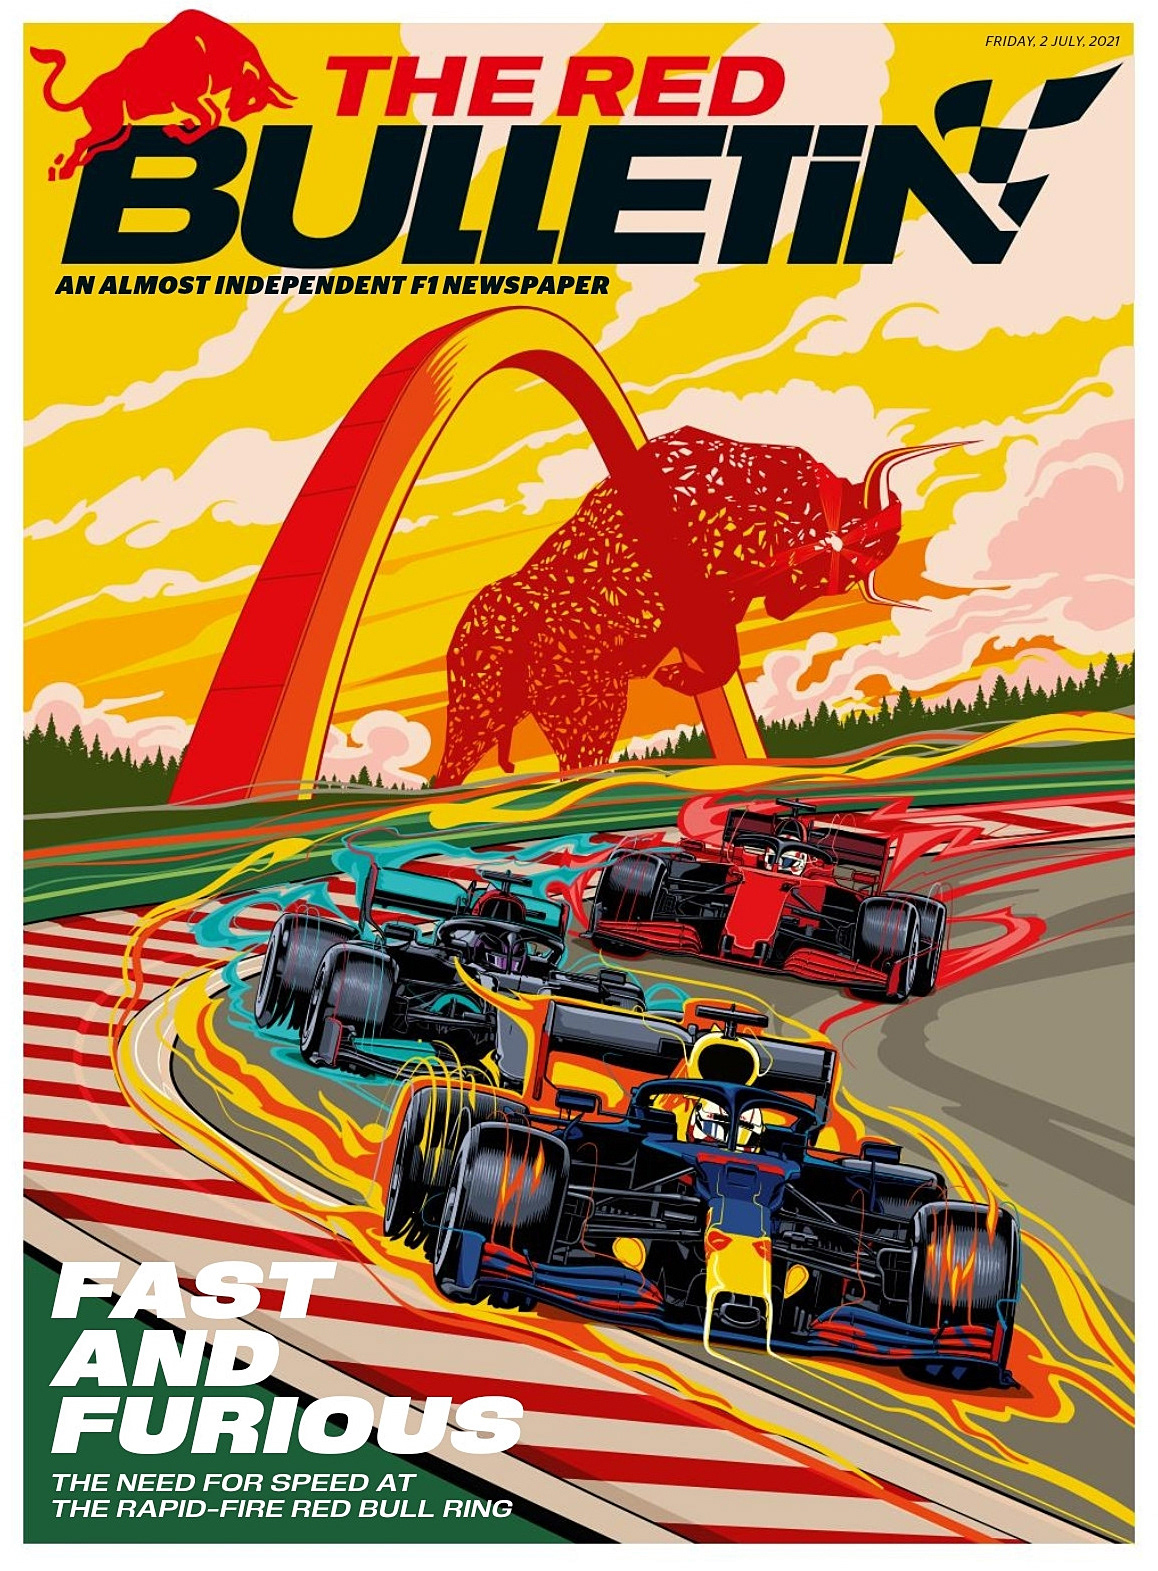 The Red Bulletin Setembro 2014 - BR by Red Bull Media House - Issuu